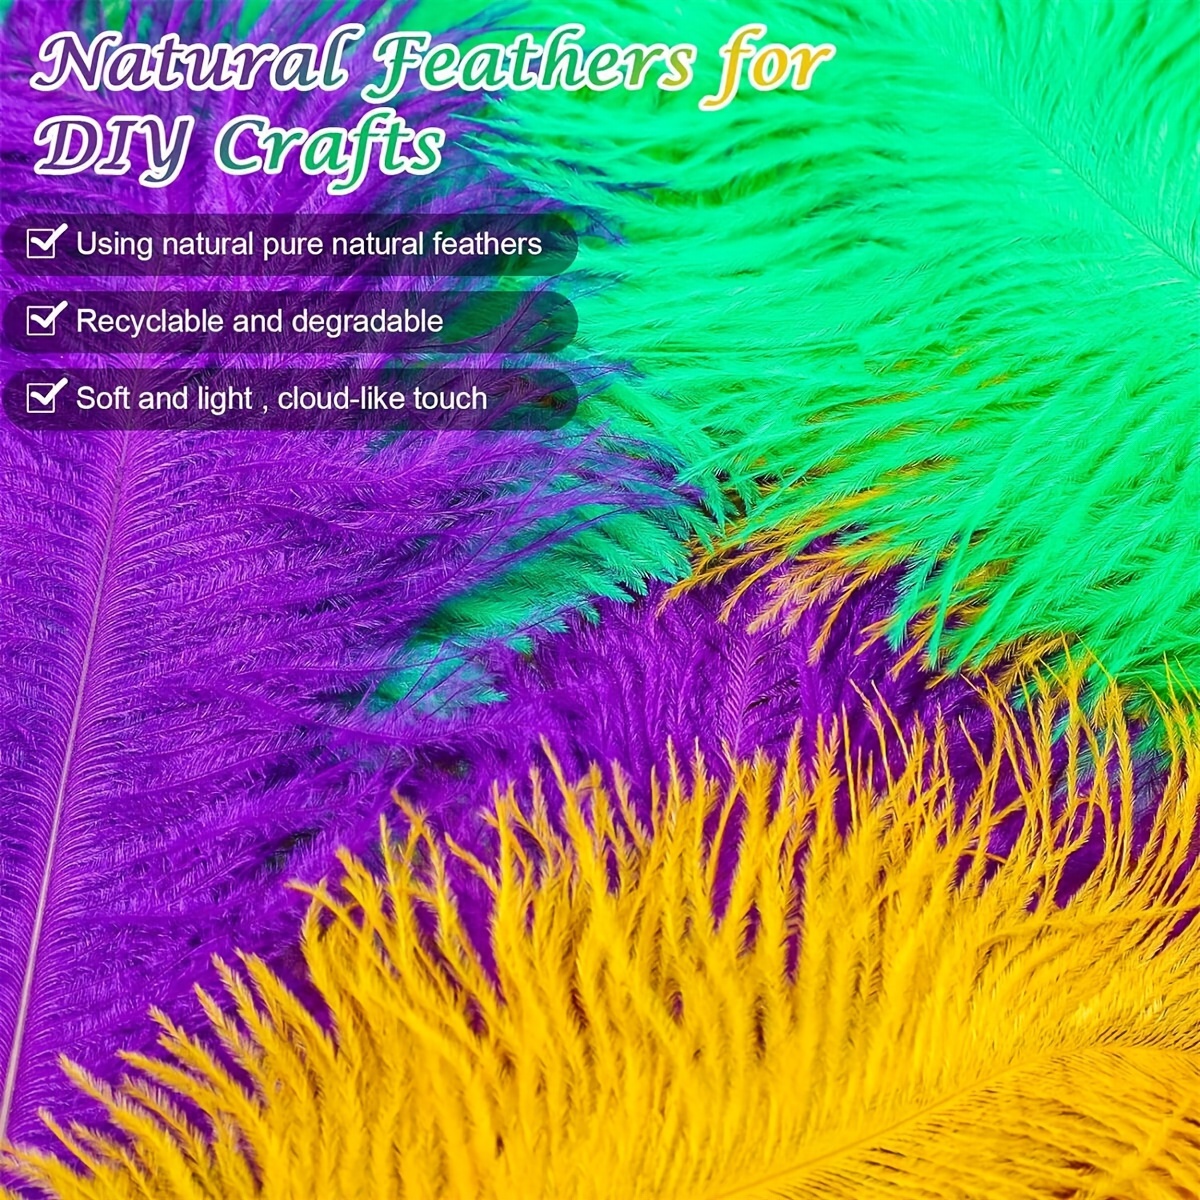  15 Pcs Mardi Gras Ostrich Feathers for Crafts, 6-8 inch  Colorful Feather Purple, Green, Gold Feathers for Mardi Gras DIY Crafts,  Vase, Party Centerpieces : Arts, Crafts & Sewing